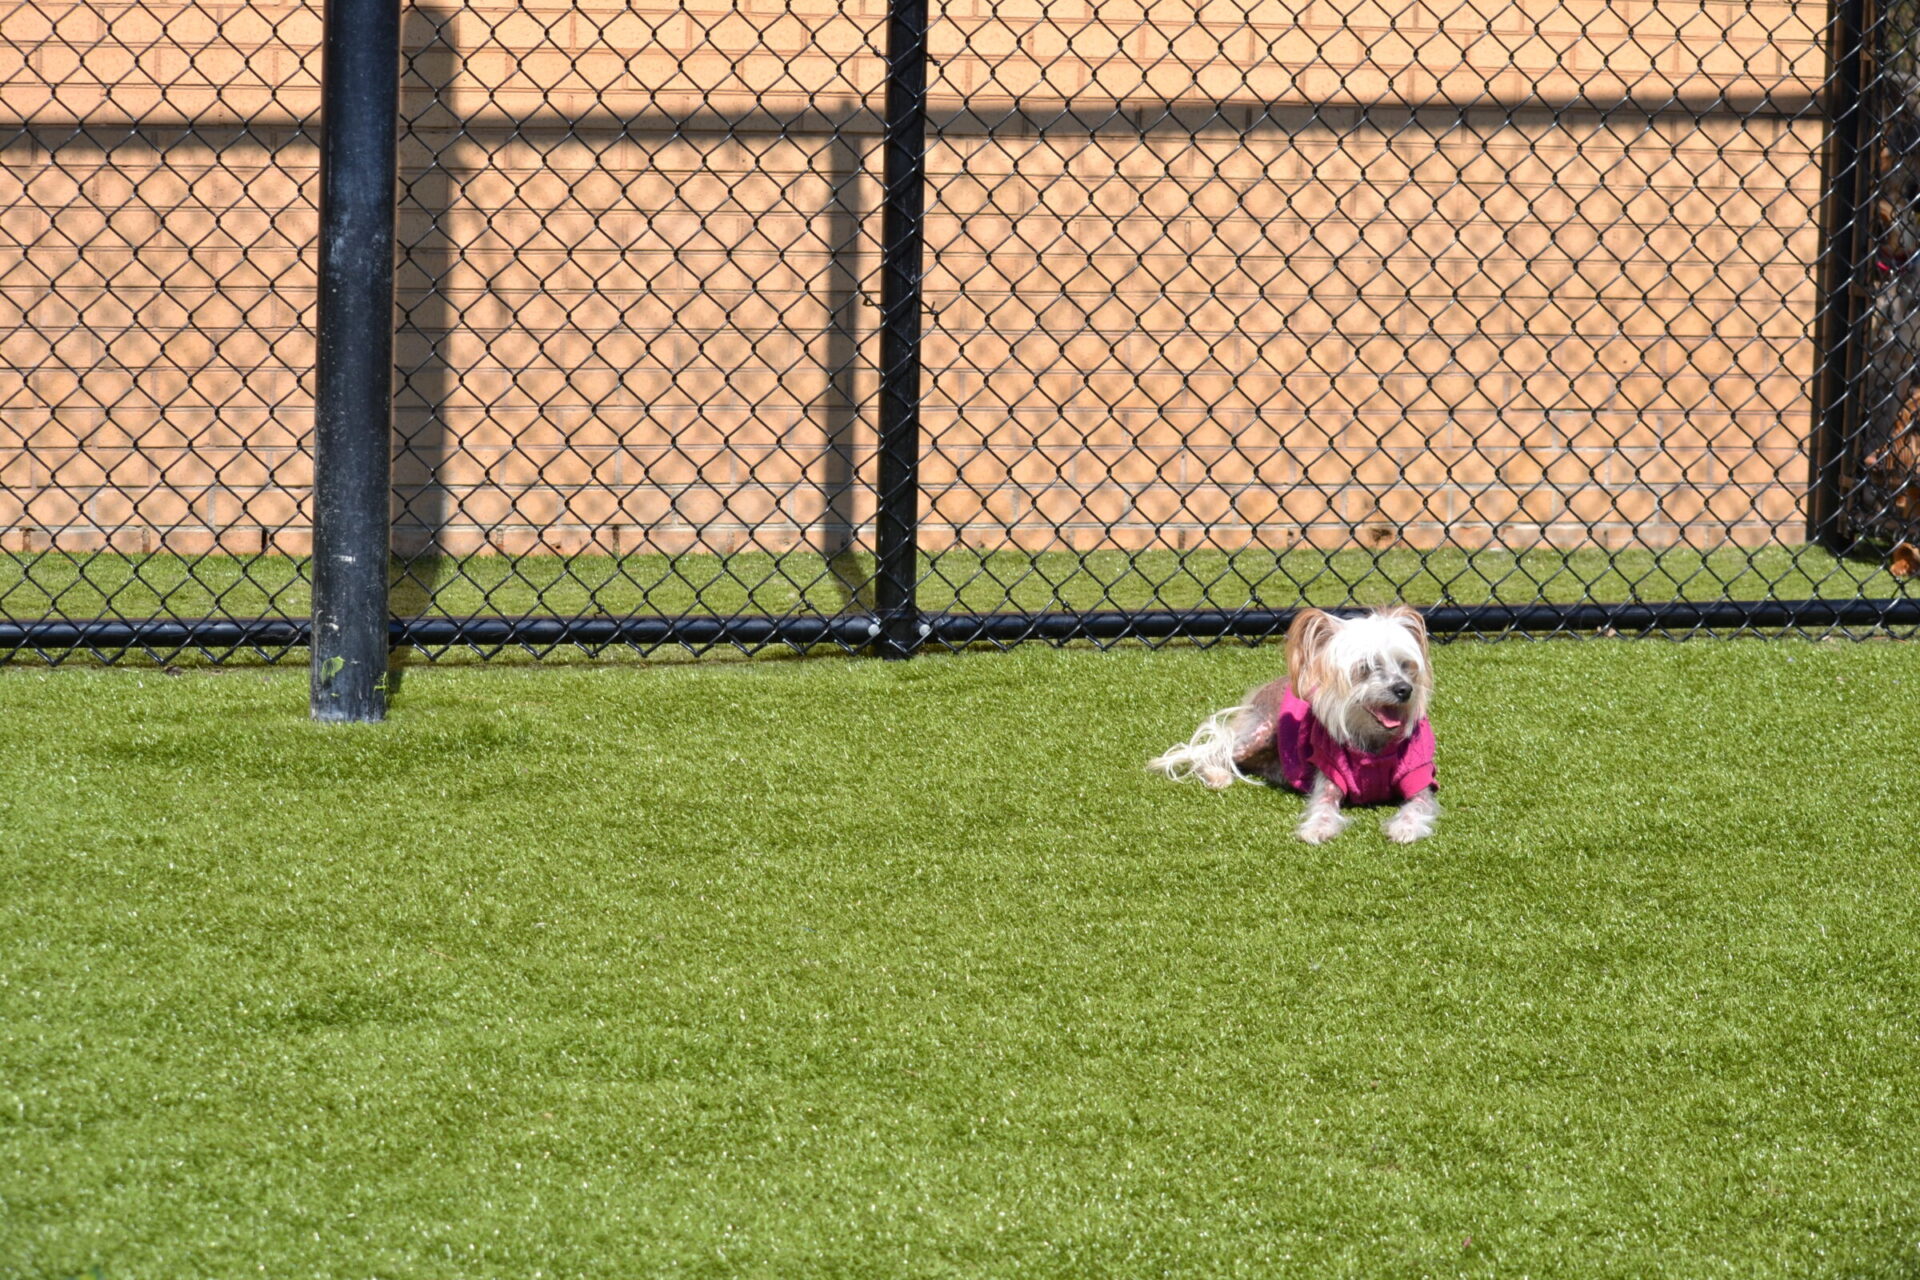 A small dog wearing a pink garment is sitting on vibrant green artificial turf beside a black metal fence with a sandy field beyond.